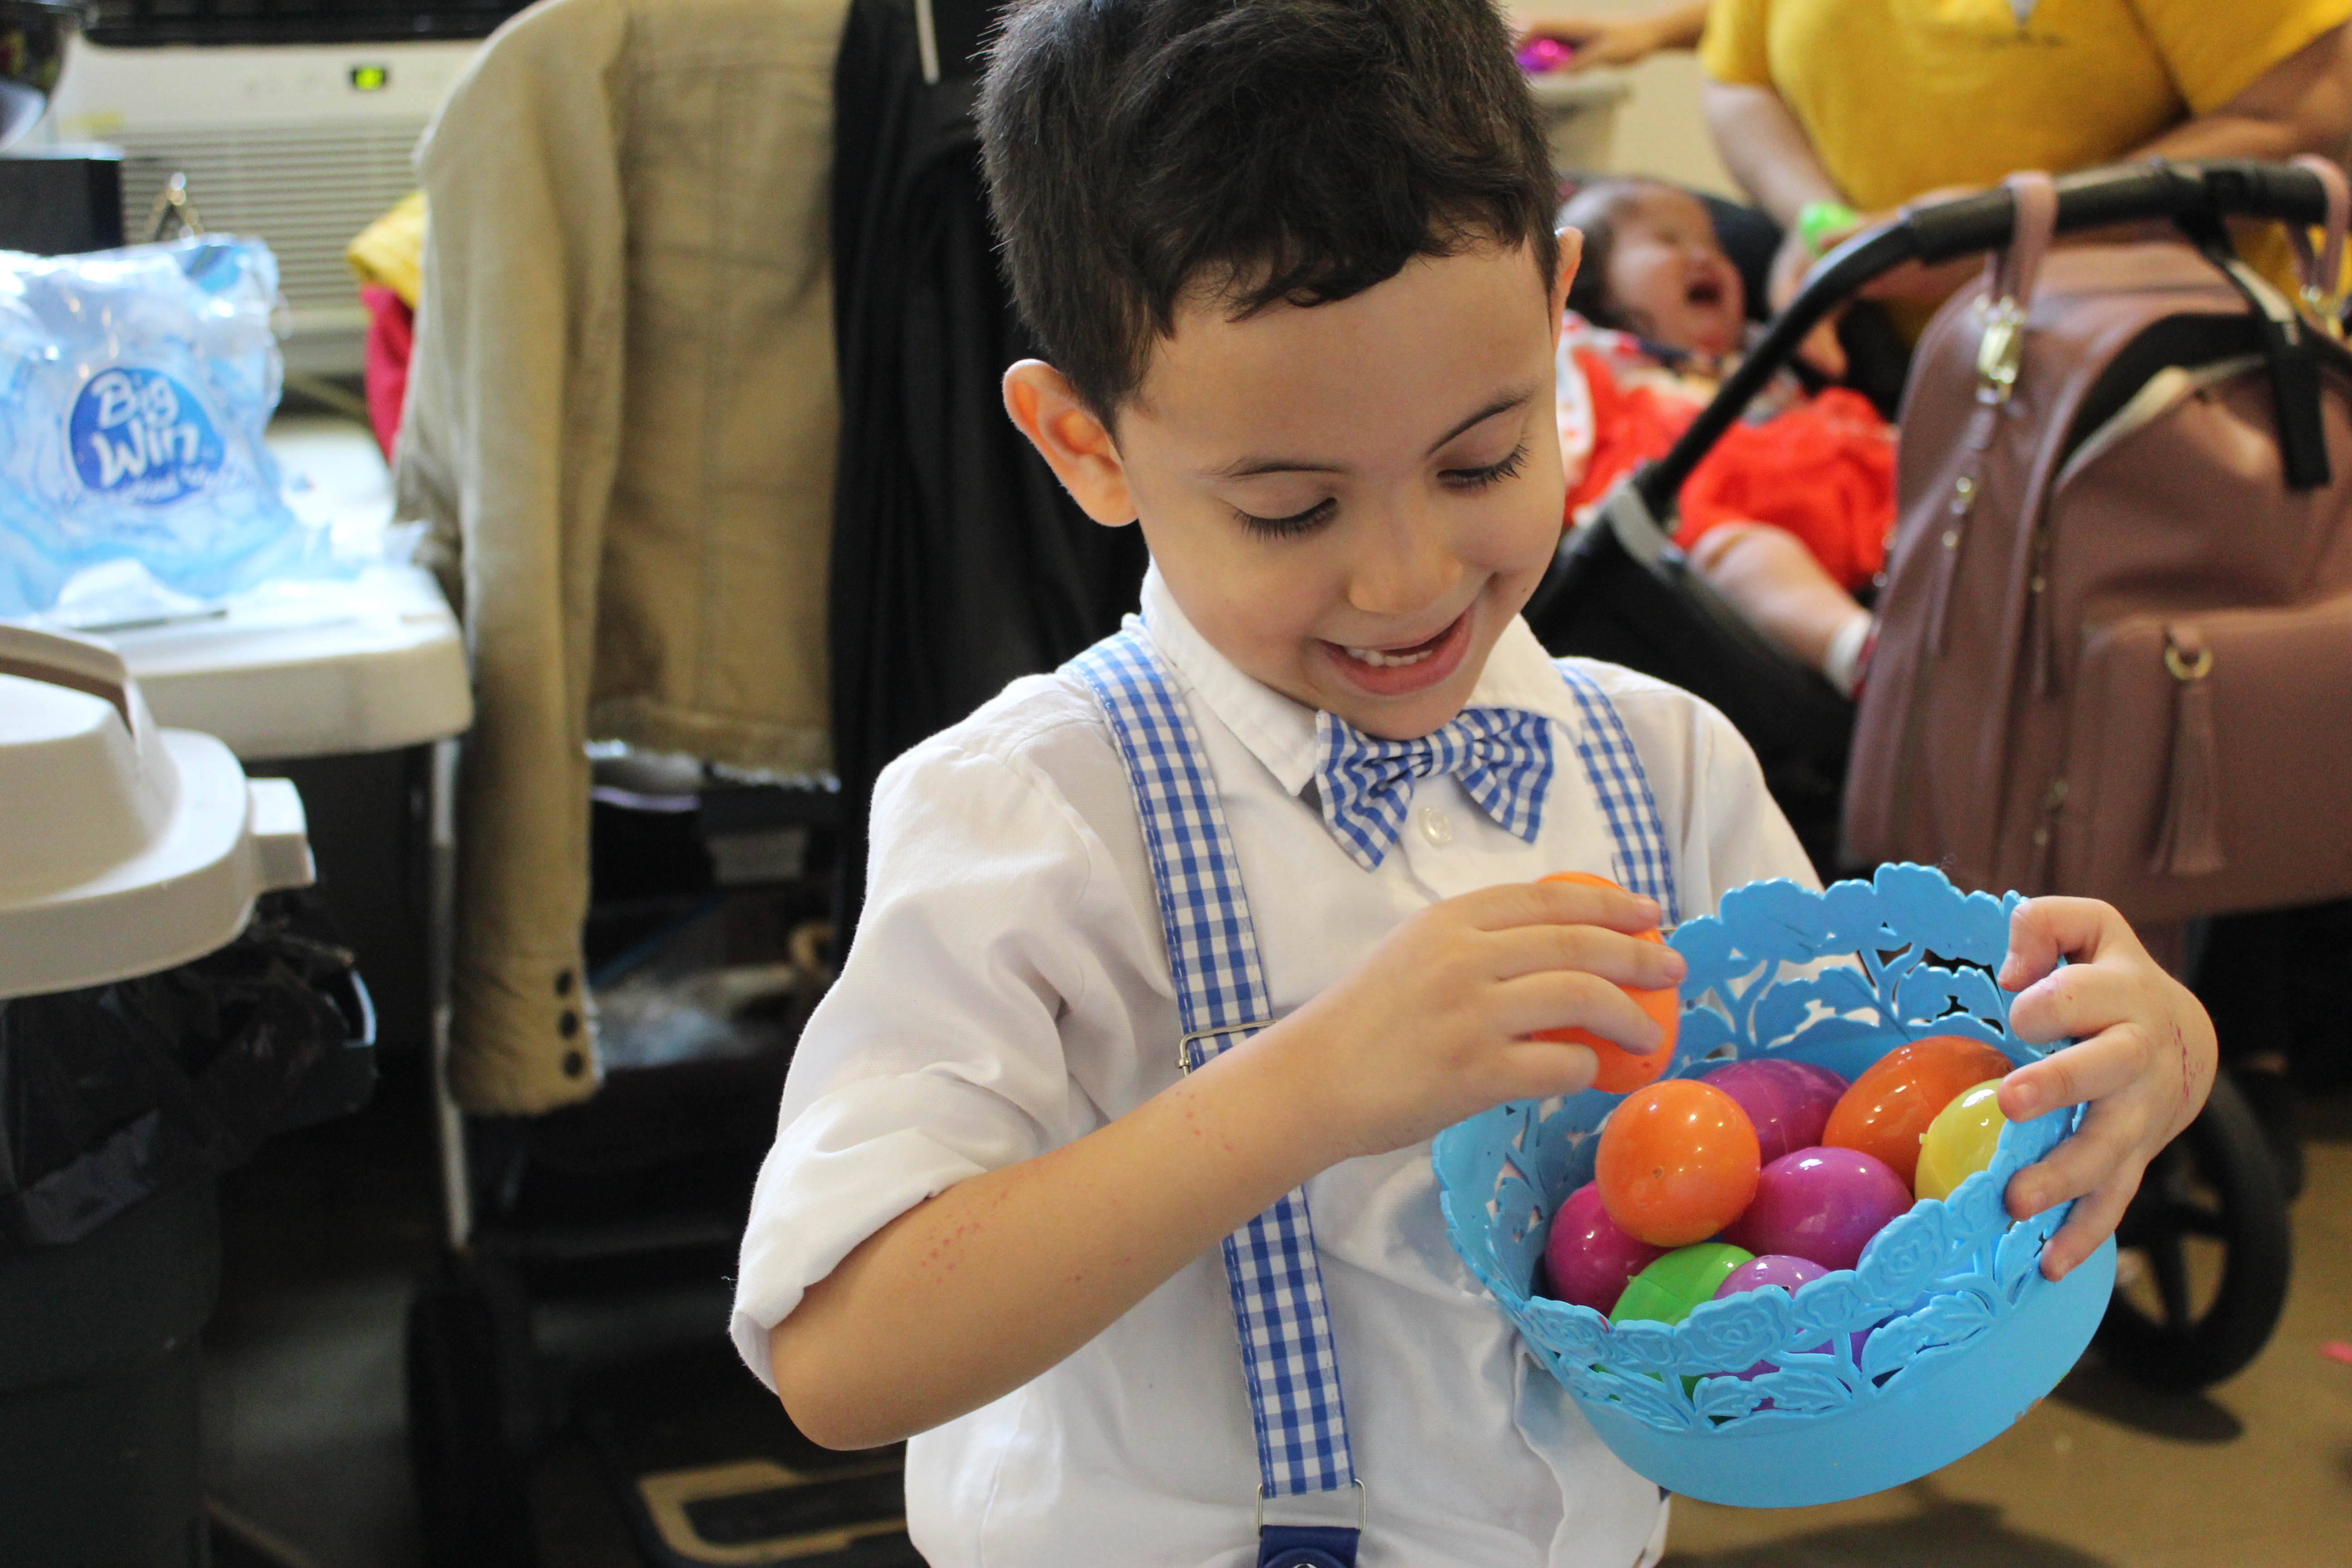 PHOTOS: Easter Crafts and Egg Hunt